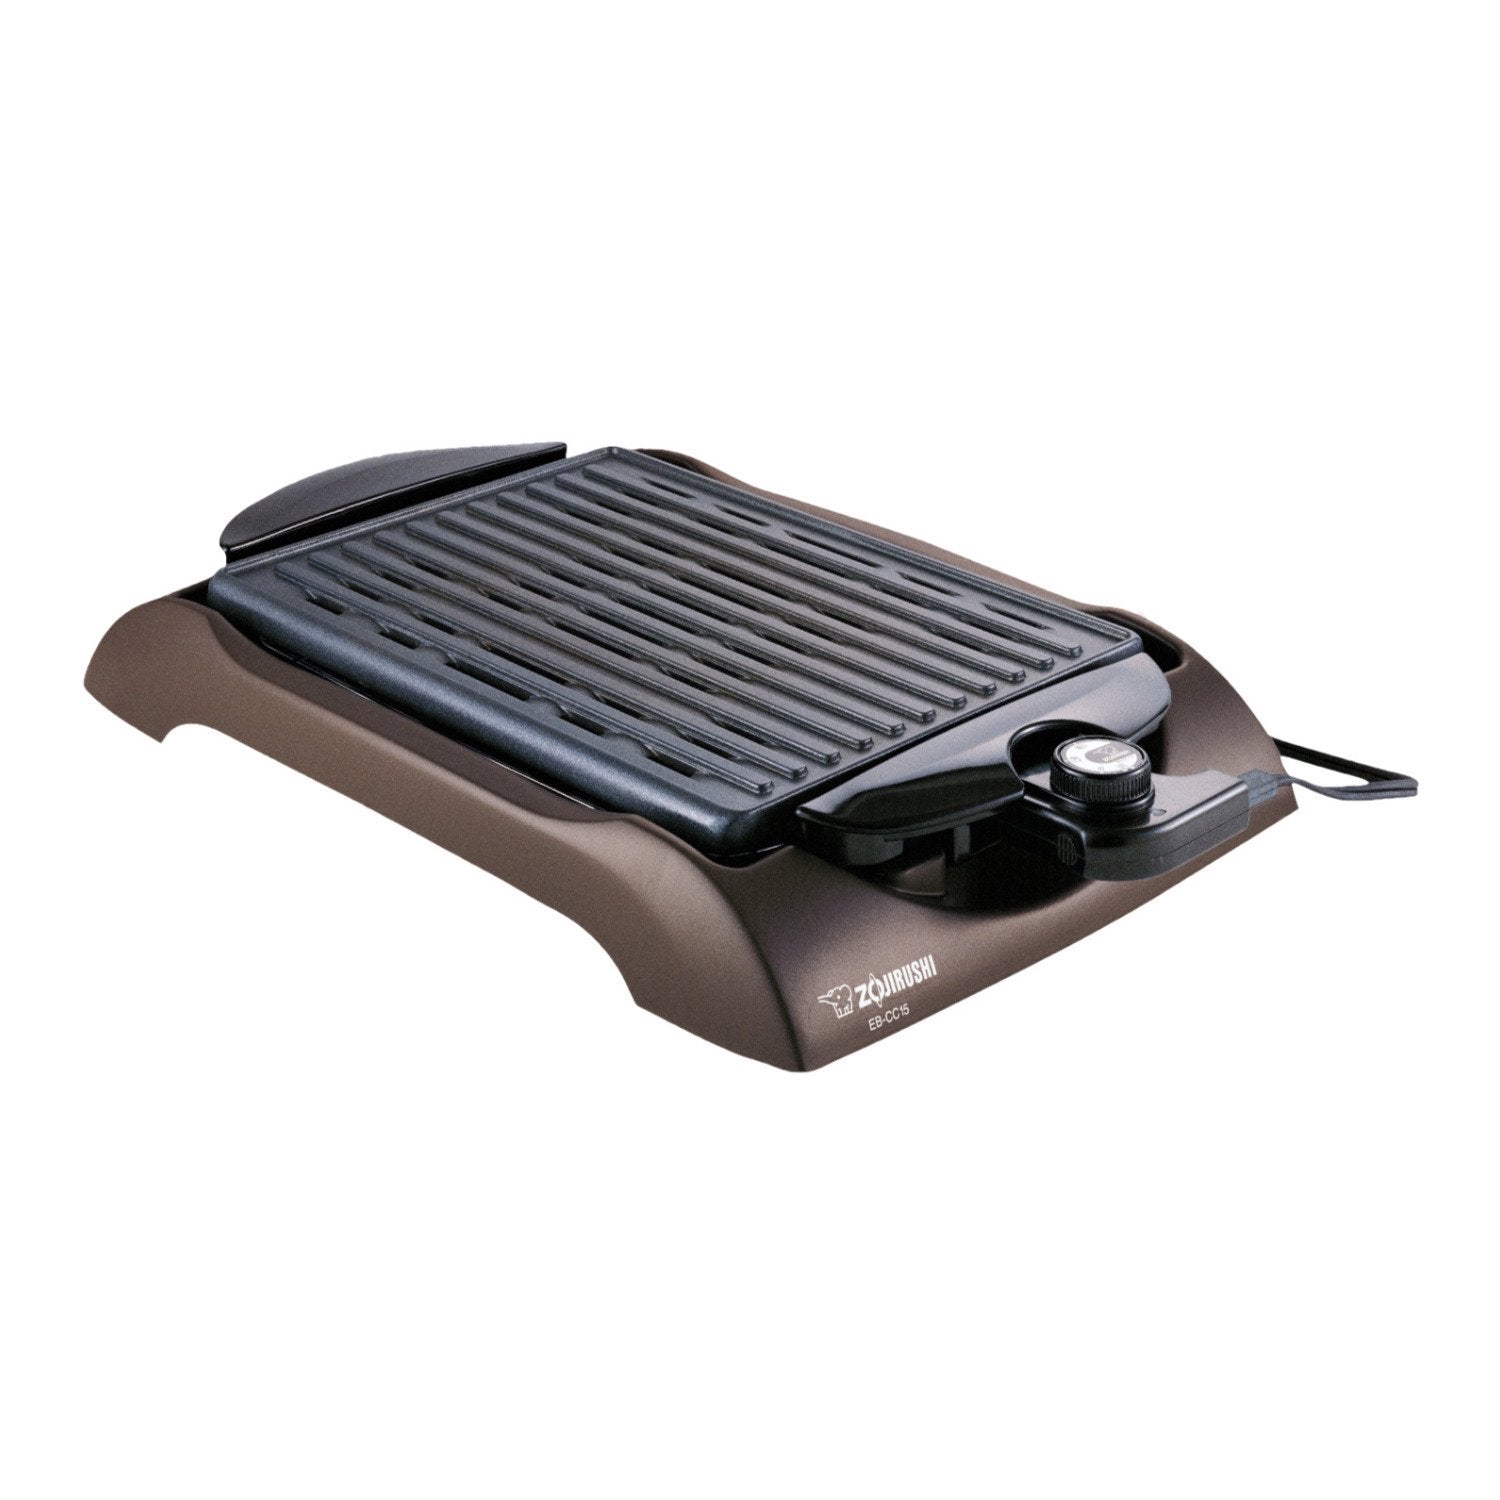 Zojirushi 7-Pound Indoor Electric Grill